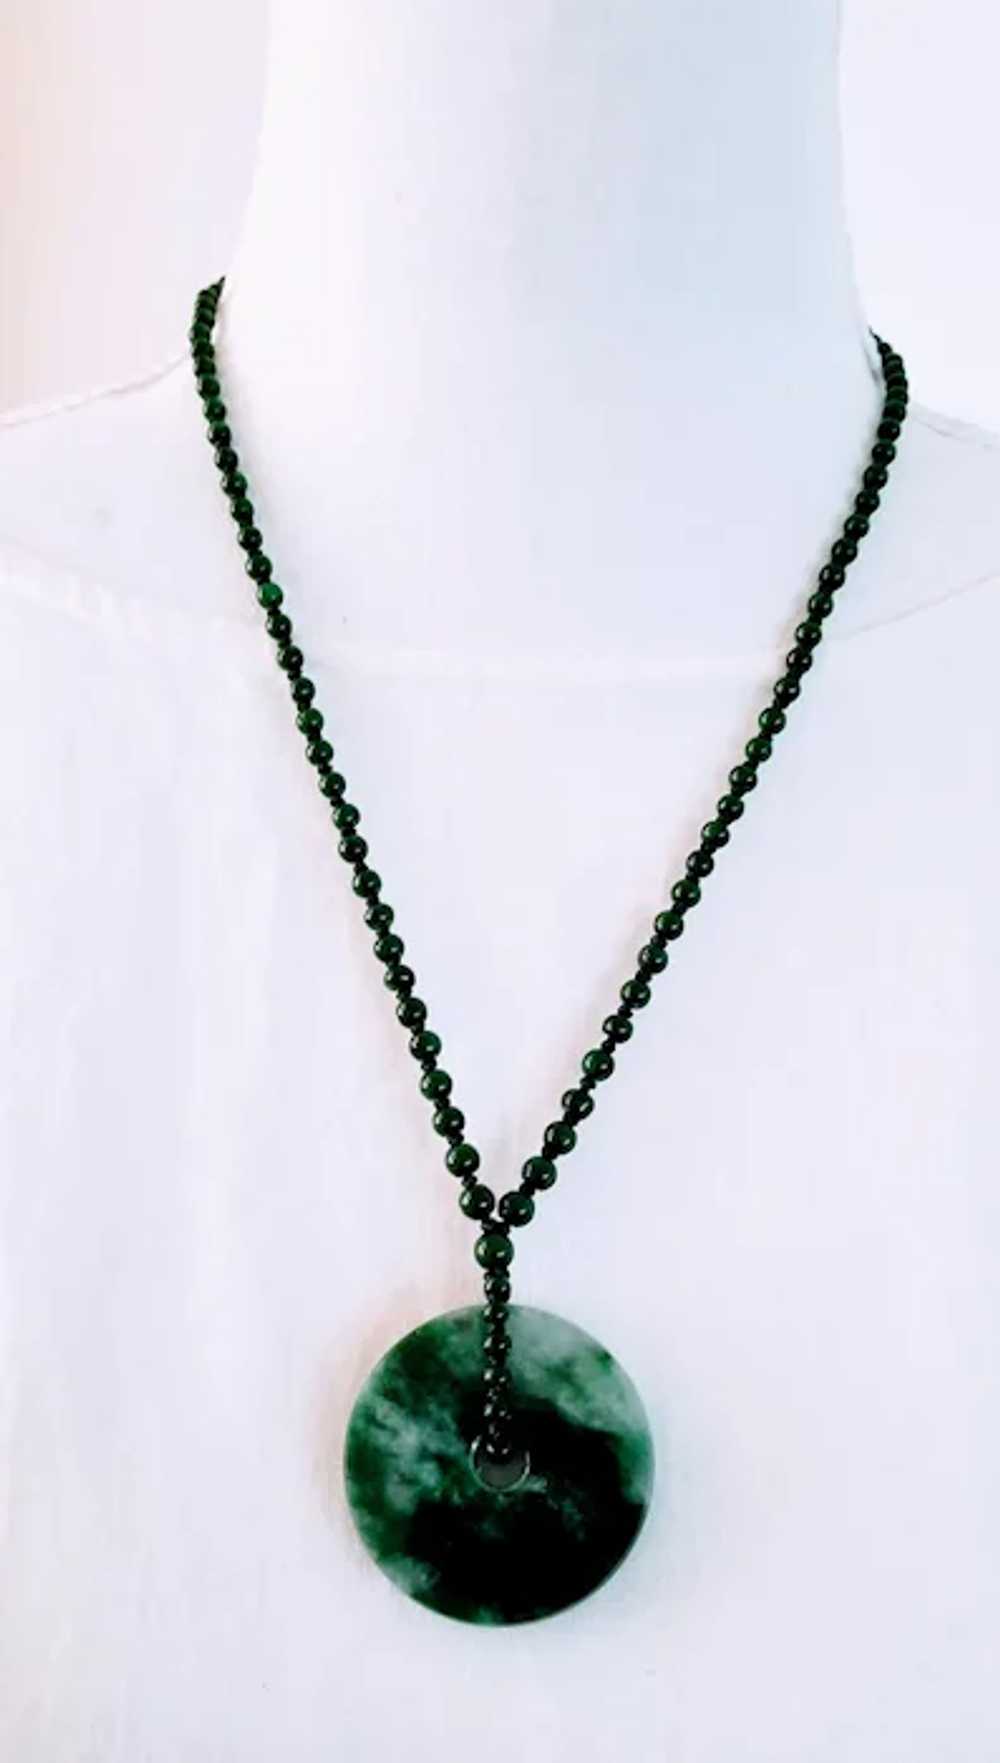 14K Jadeite Pendant and Beads Necklace - image 4